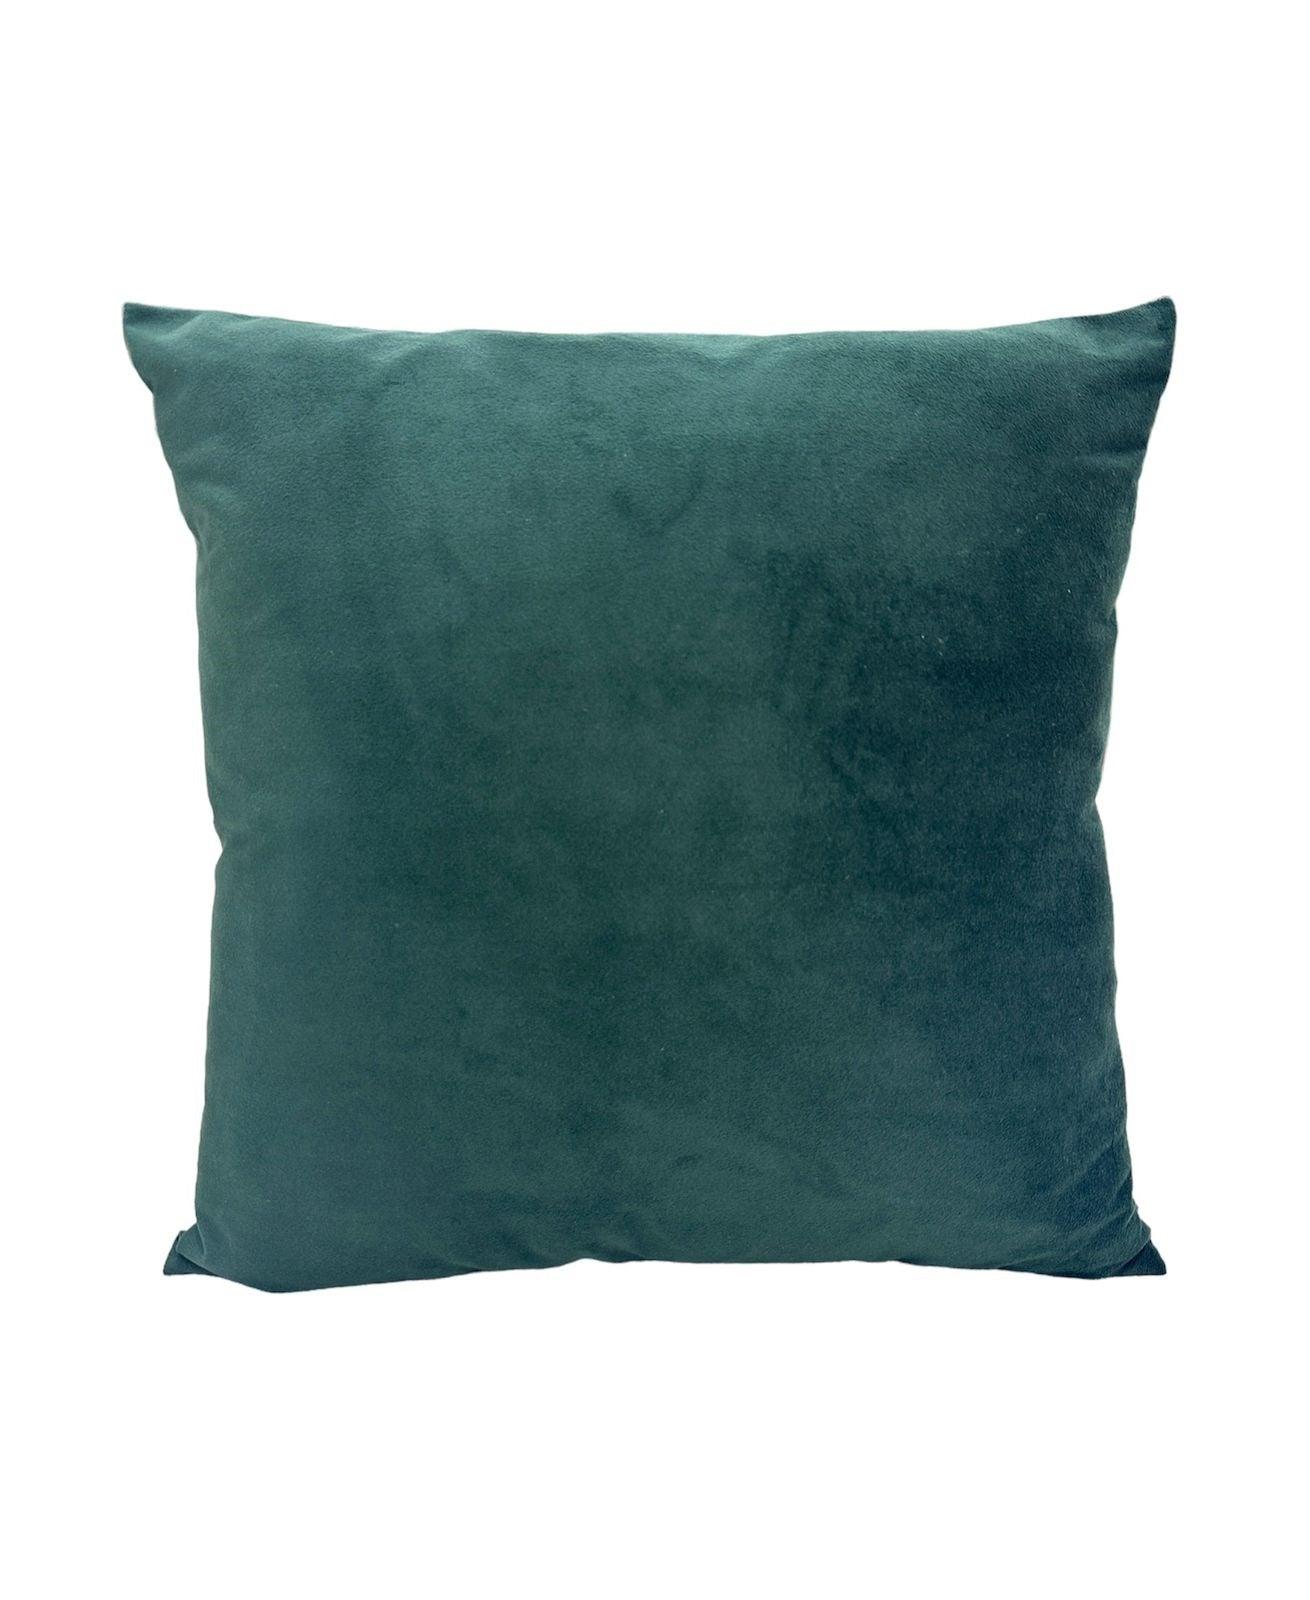 Velvet cushion with a comfortable and durable design, available in various sizes and designs. Perfect for any occasion.